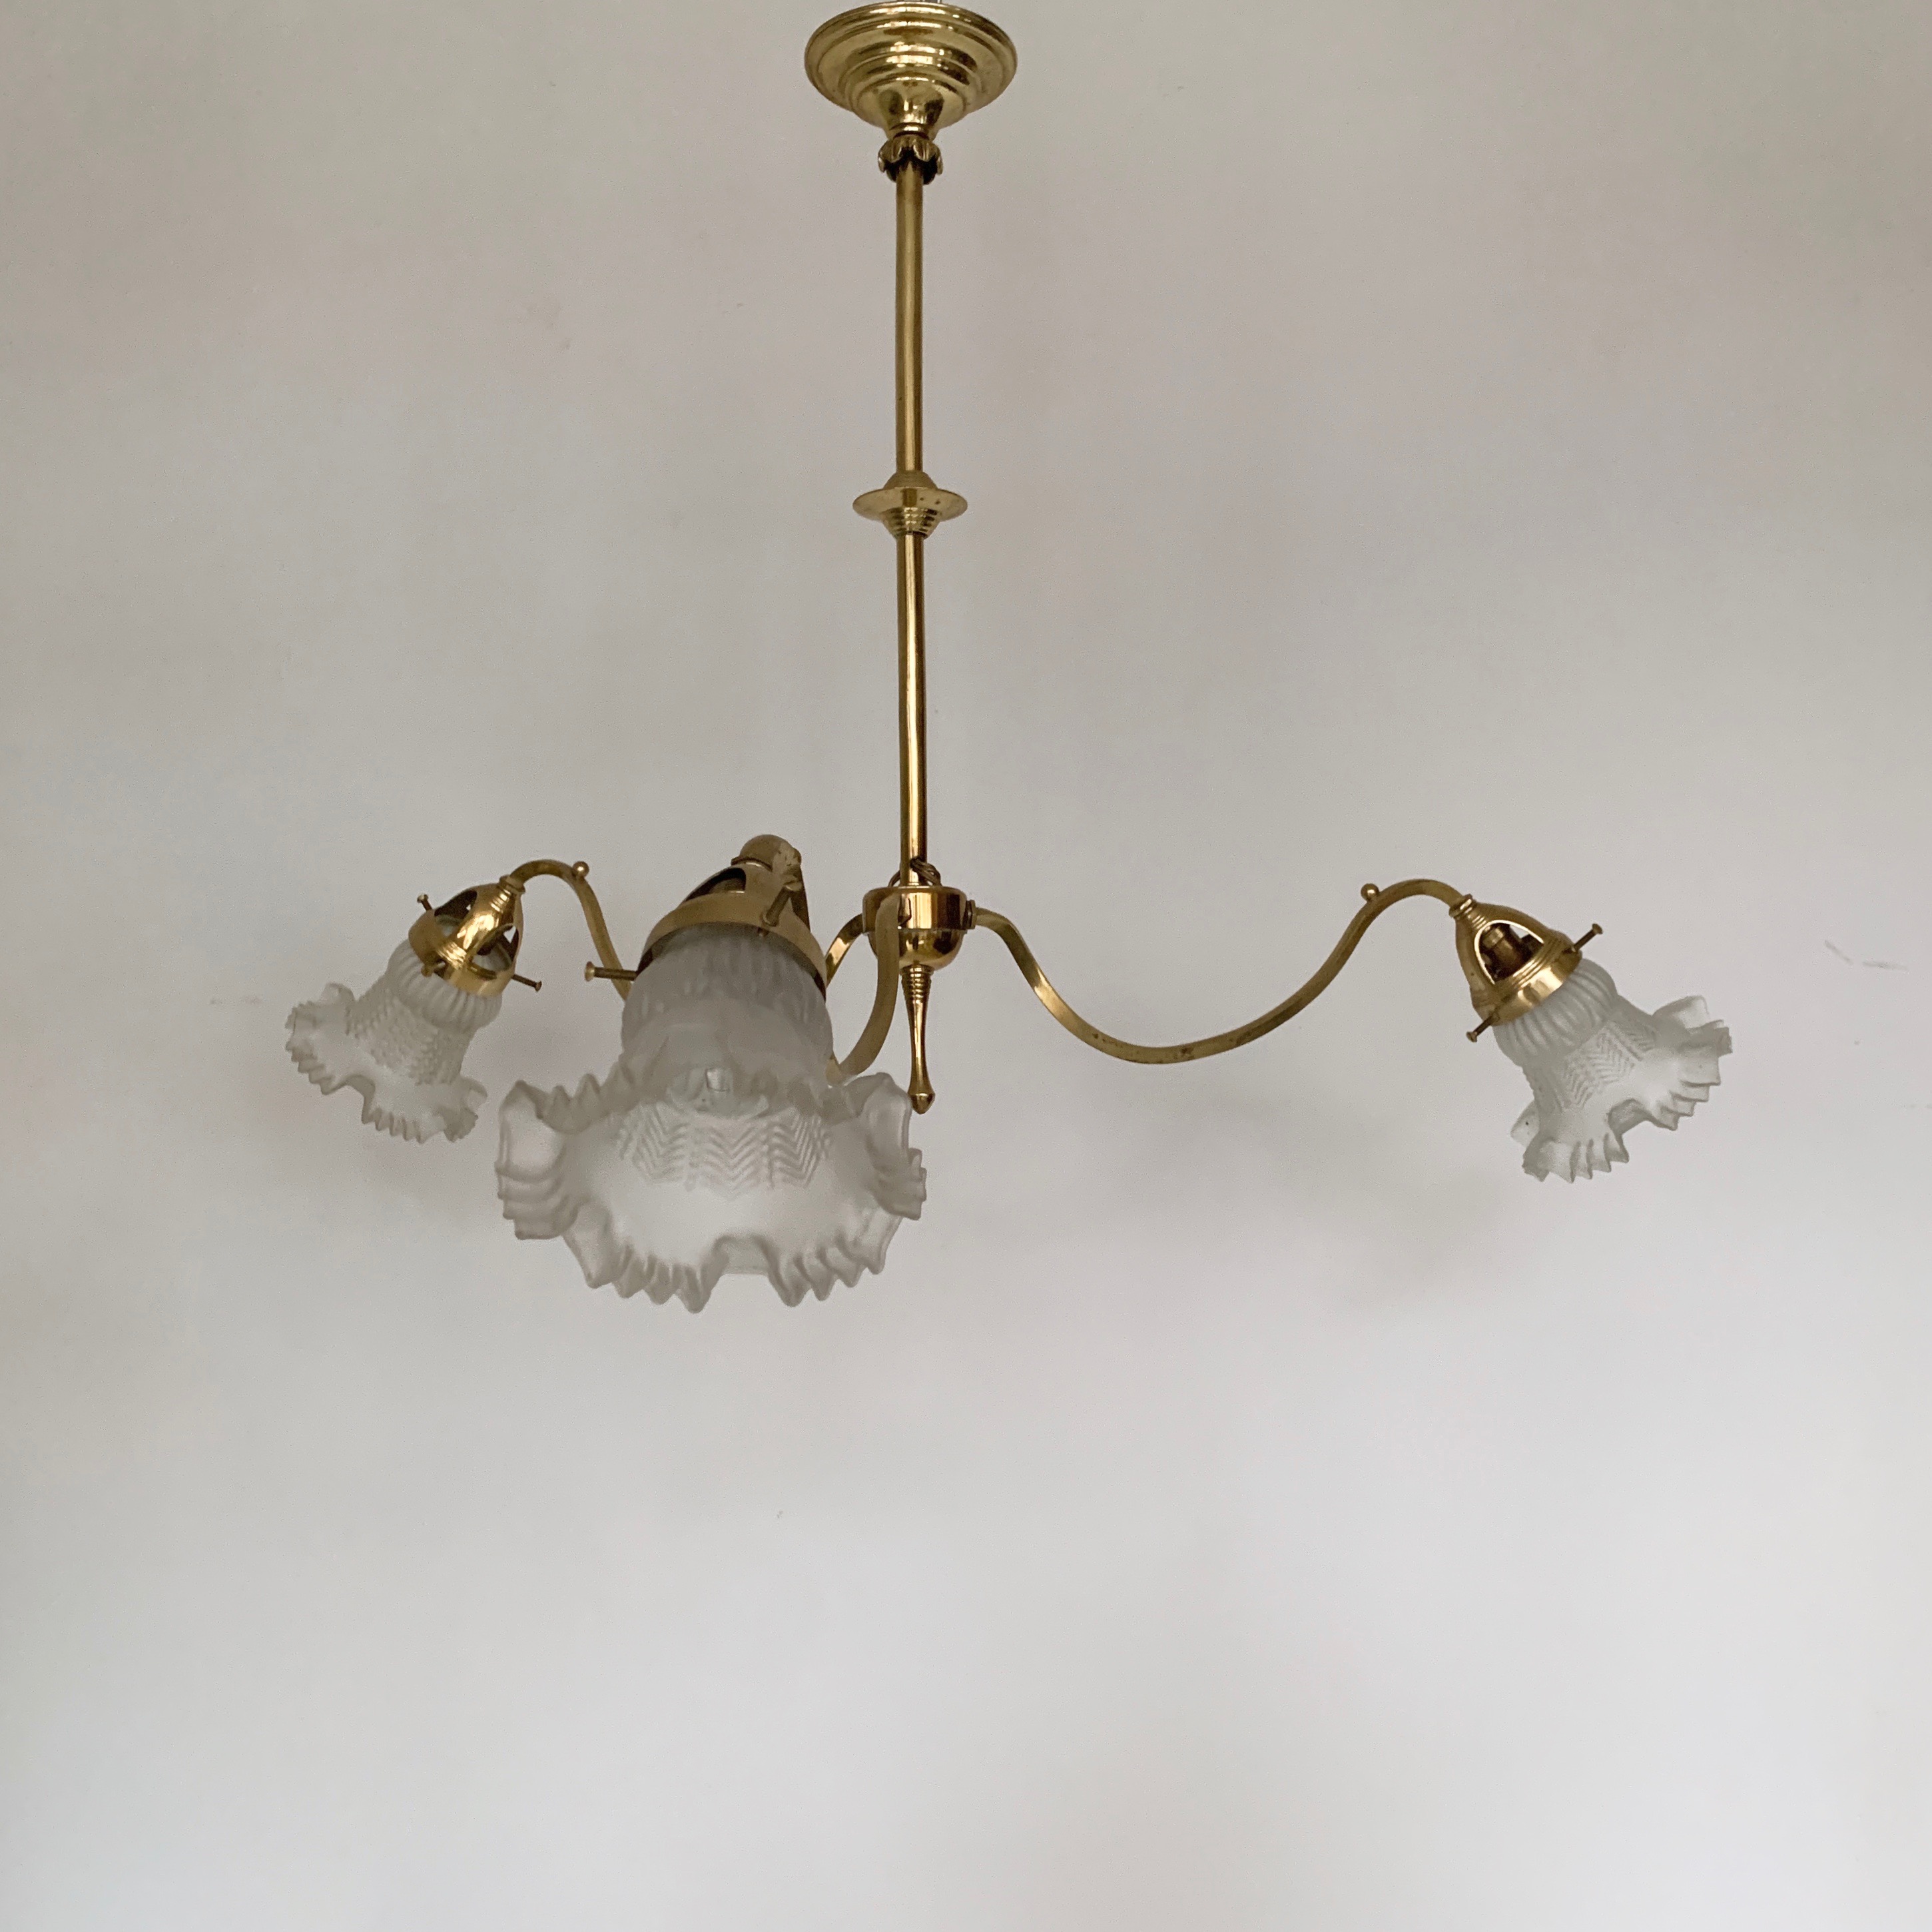 https://agapanthusinteriors.com/wp-content/uploads/2020/01/Edwardian-Three-Arm-Polished-Brass-Chandelier-with-Frosted-Frill-Shades.jpeg